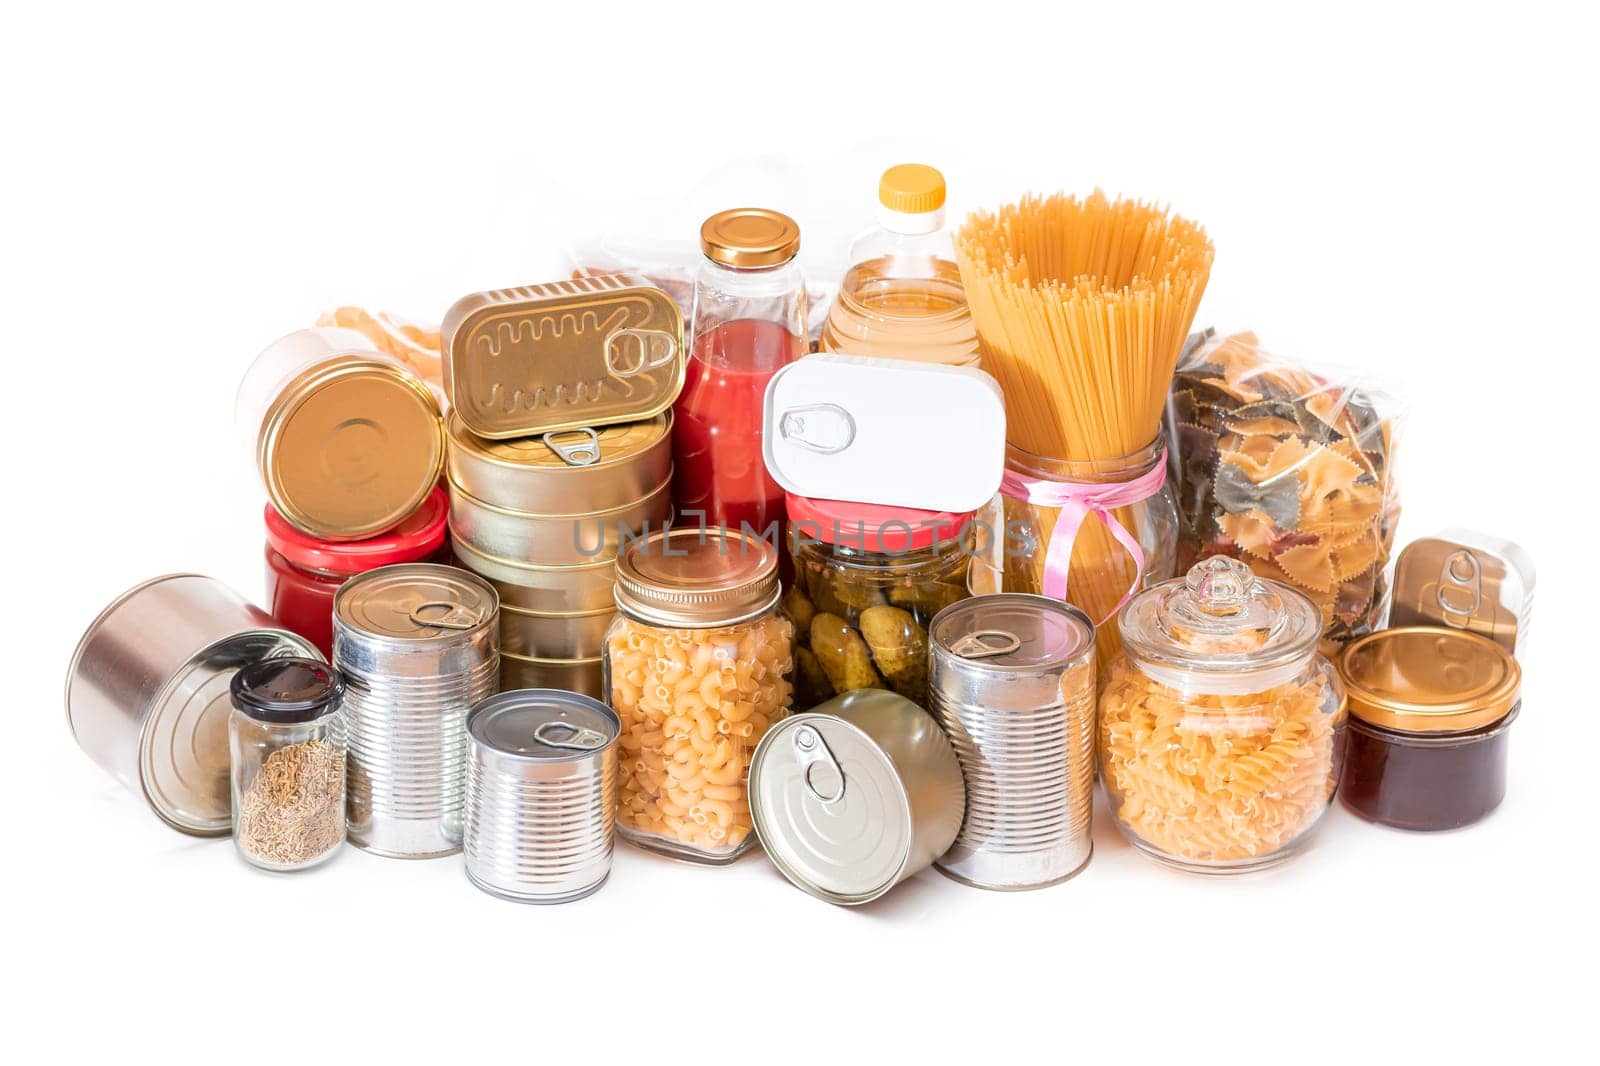 Food Reserves: Canned Food, Spaghetti, Pate, Tuna, Tomato Juice, Pasta, Fish and Grocery - Isolated by InfinitumProdux